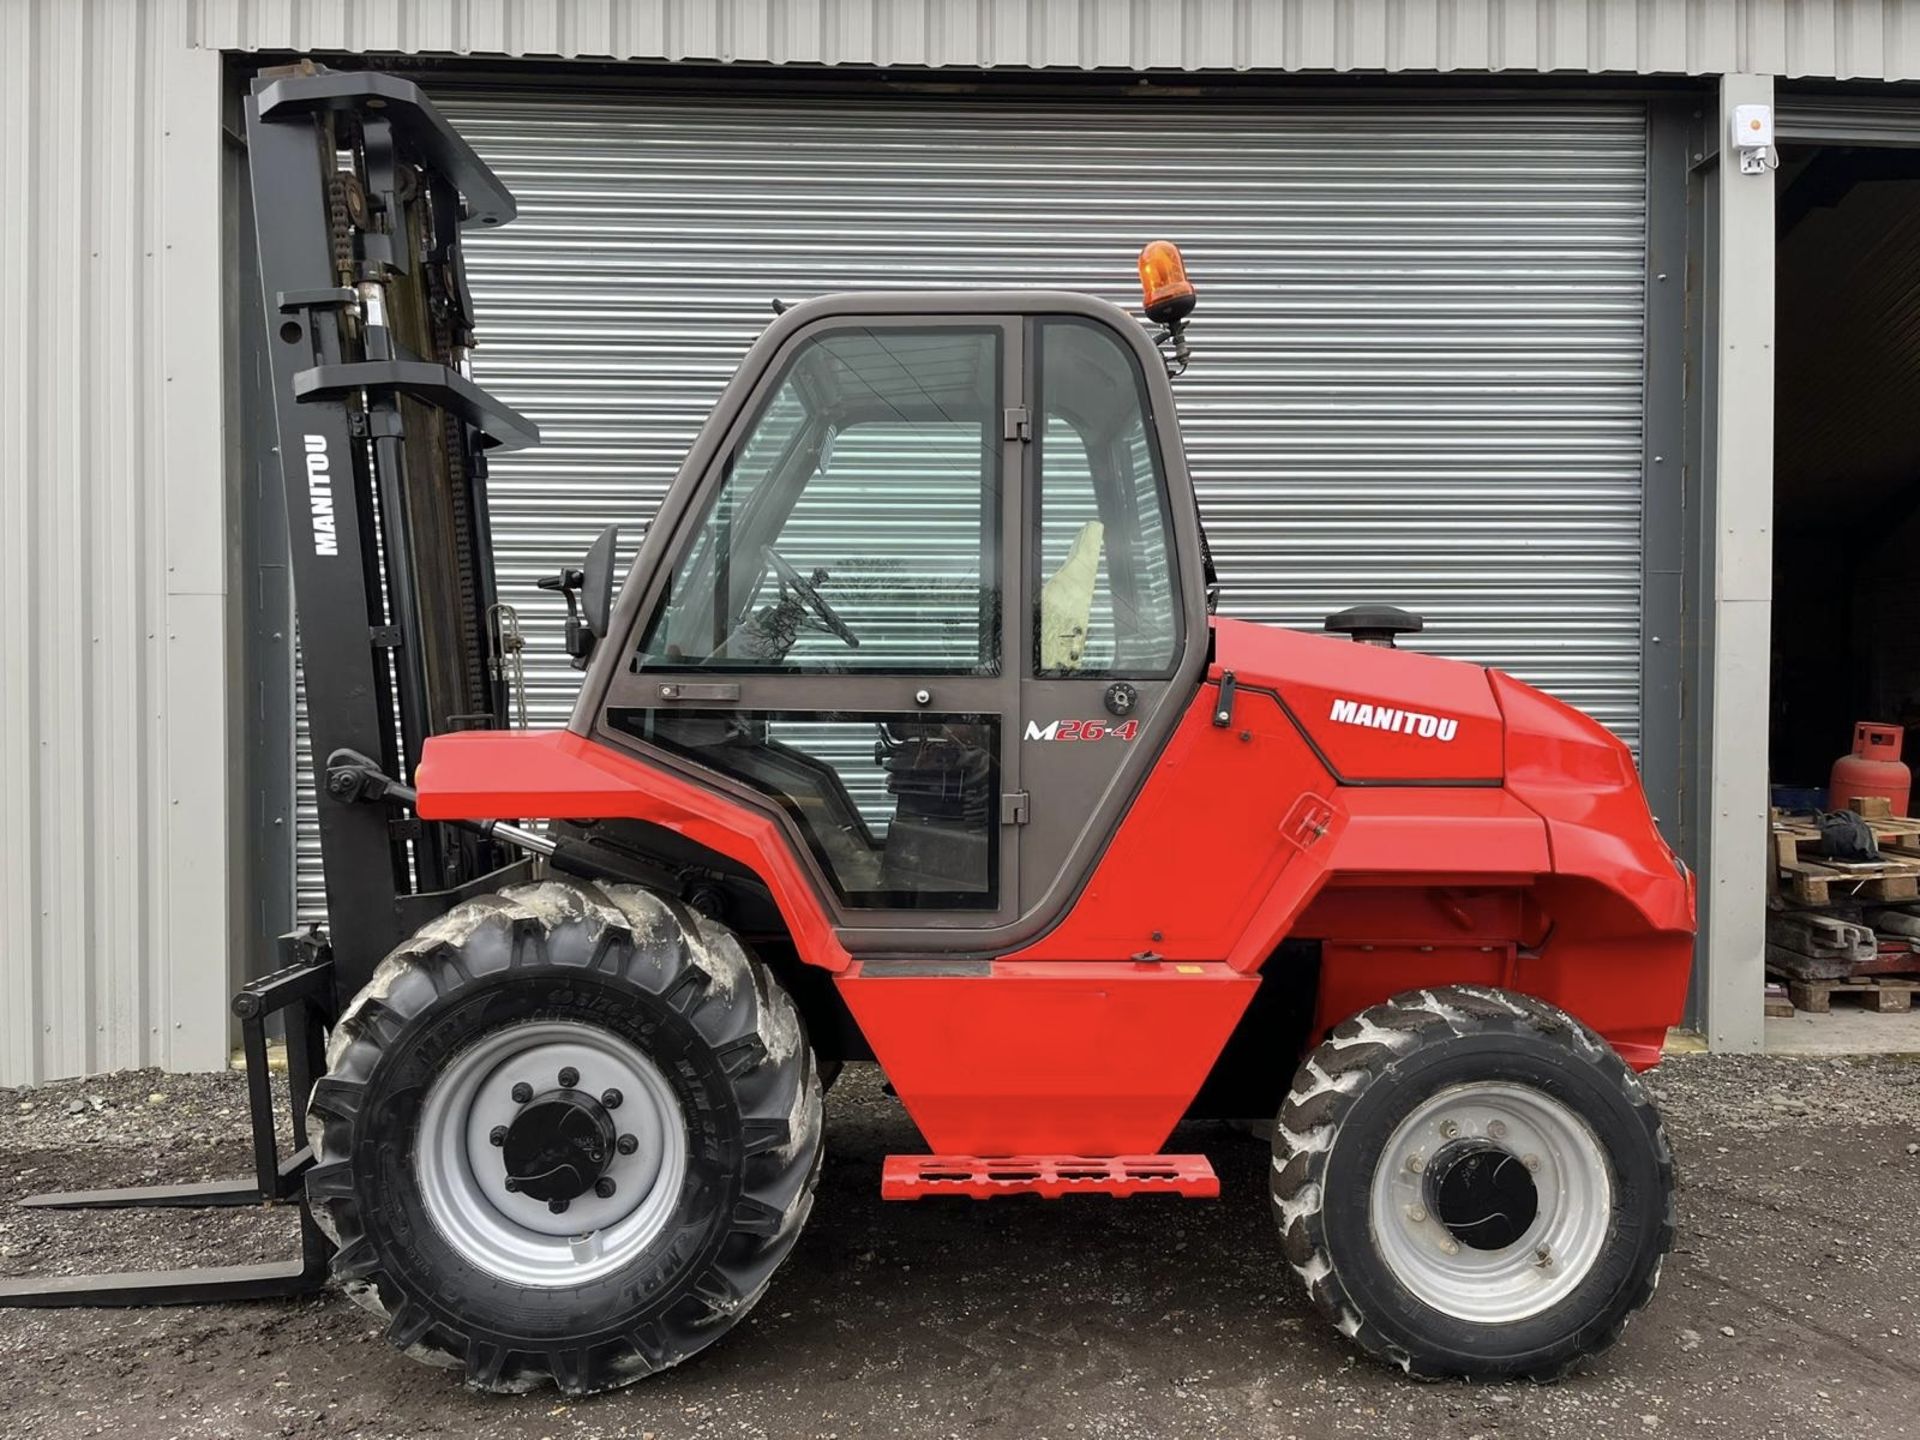 2017, MANITOU - M26, 2.6 Tonne (4WD) Forklift Truck - Image 3 of 6